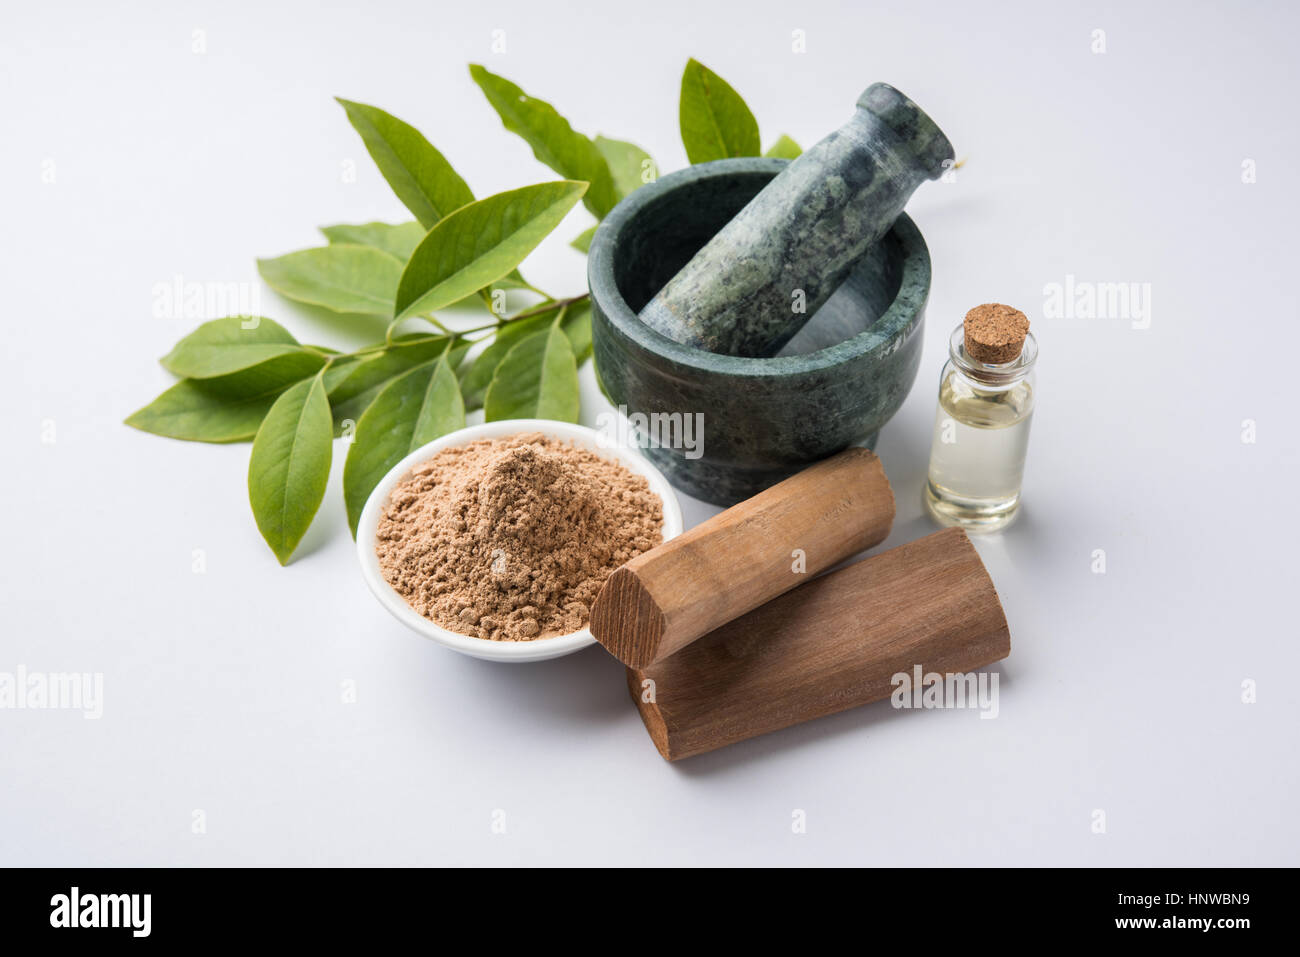 Chandan or sandalwood powder with traditional mortar, sandalwood sticks, perfume or oil and green leaves. selective focus Stock Photo